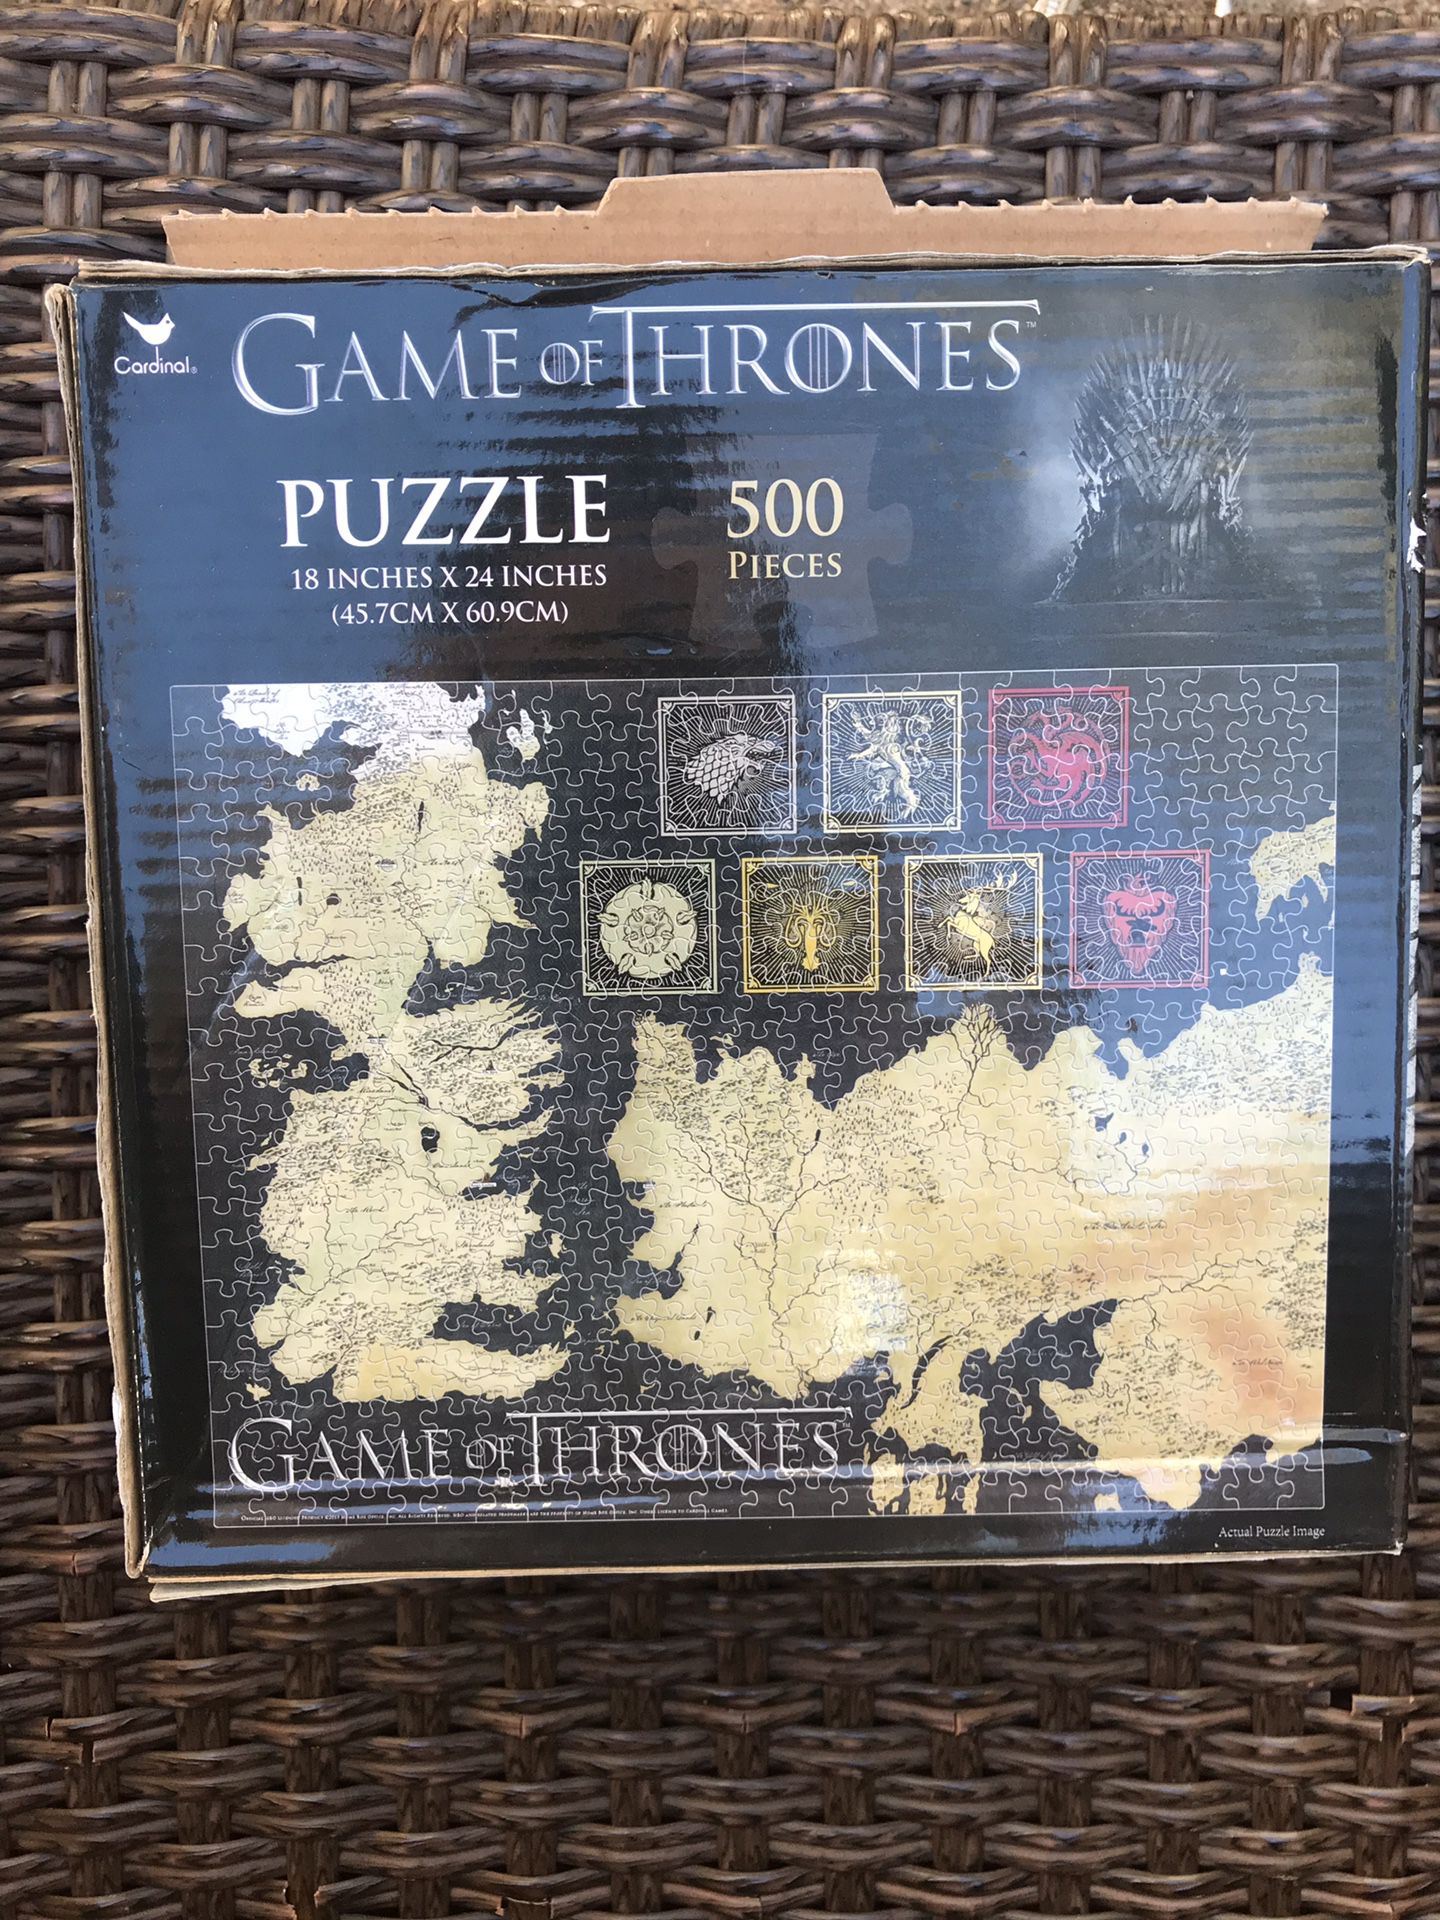 Brand new GAME OF THRONES puzzle 500 piece